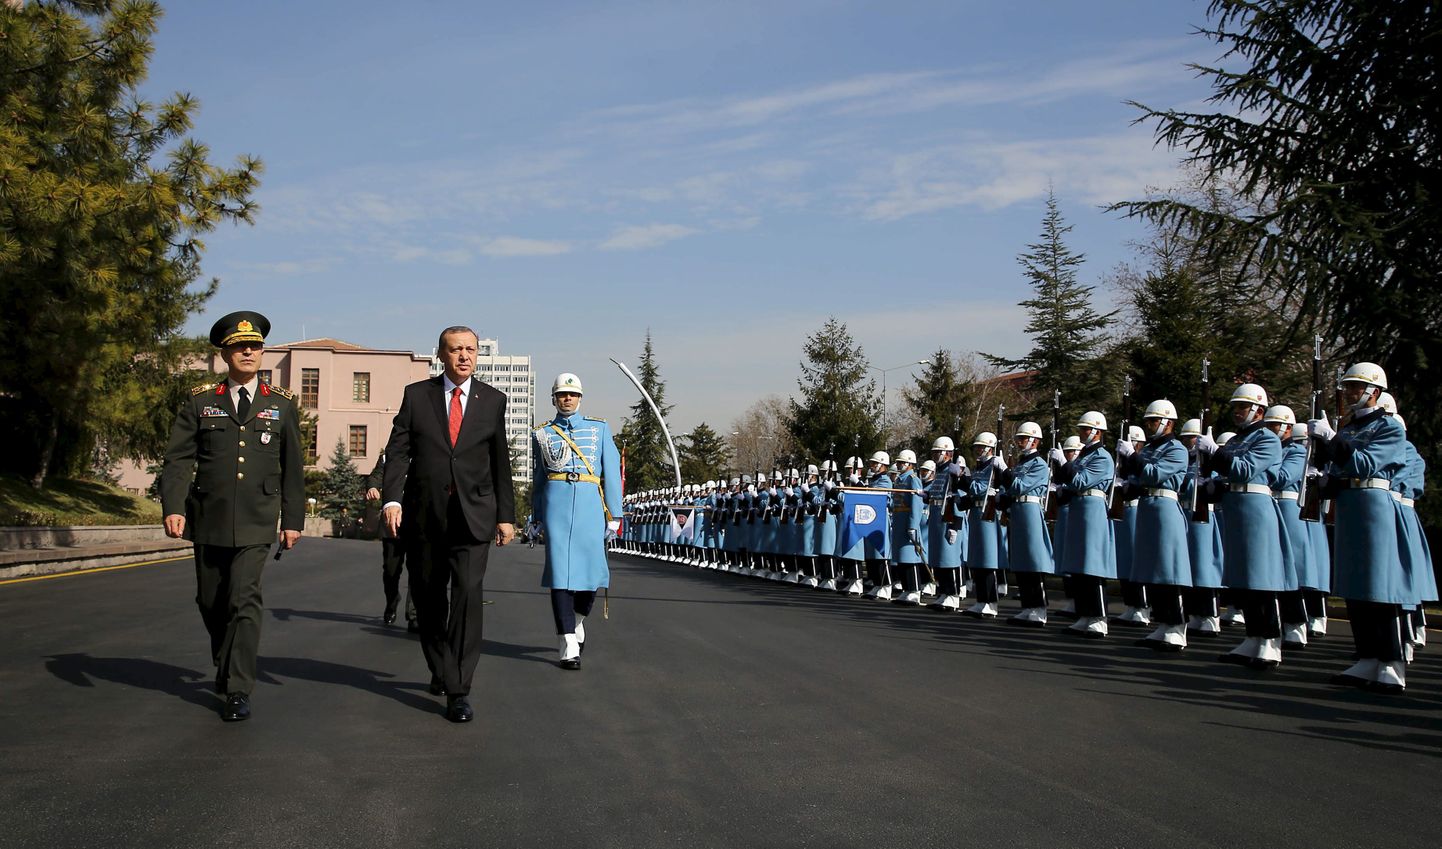 Turkish President Tayyip Erdogan (2nd L), flanked by Chief of Staff General Hulusi Akar, reviews a guard of honour as he arrives the Army headquarters in Ankara, Turkey February 18, 2016, in this handout photo provided by the Presidential Palace. REUTERS/Yasin Bulbul/Presidential Palace/Handout via Reuters ATTENTION EDITORS - THIS IMAGE WAS PROVIDED BY A THIRD PARTY. REUTERS IS UNABLE TO INDEPENDENTLY VERIFY THE AUTHENTICITY, CONTENT, LOCATION OR DATE OF THIS IMAGE. FOR EDITORIAL USE ONLY. NOT FOR SALE FOR MARKETING OR ADVERTISING CAMPAIGNS. FOR EDITORIAL USE ONLY. NO RESALES. NO ARCHIVE. THE PICTURE IS DISTRIBUTED EXACTLY AS RECEIVED BY REUTERS, AS A SERVICE TO CLIENTS.